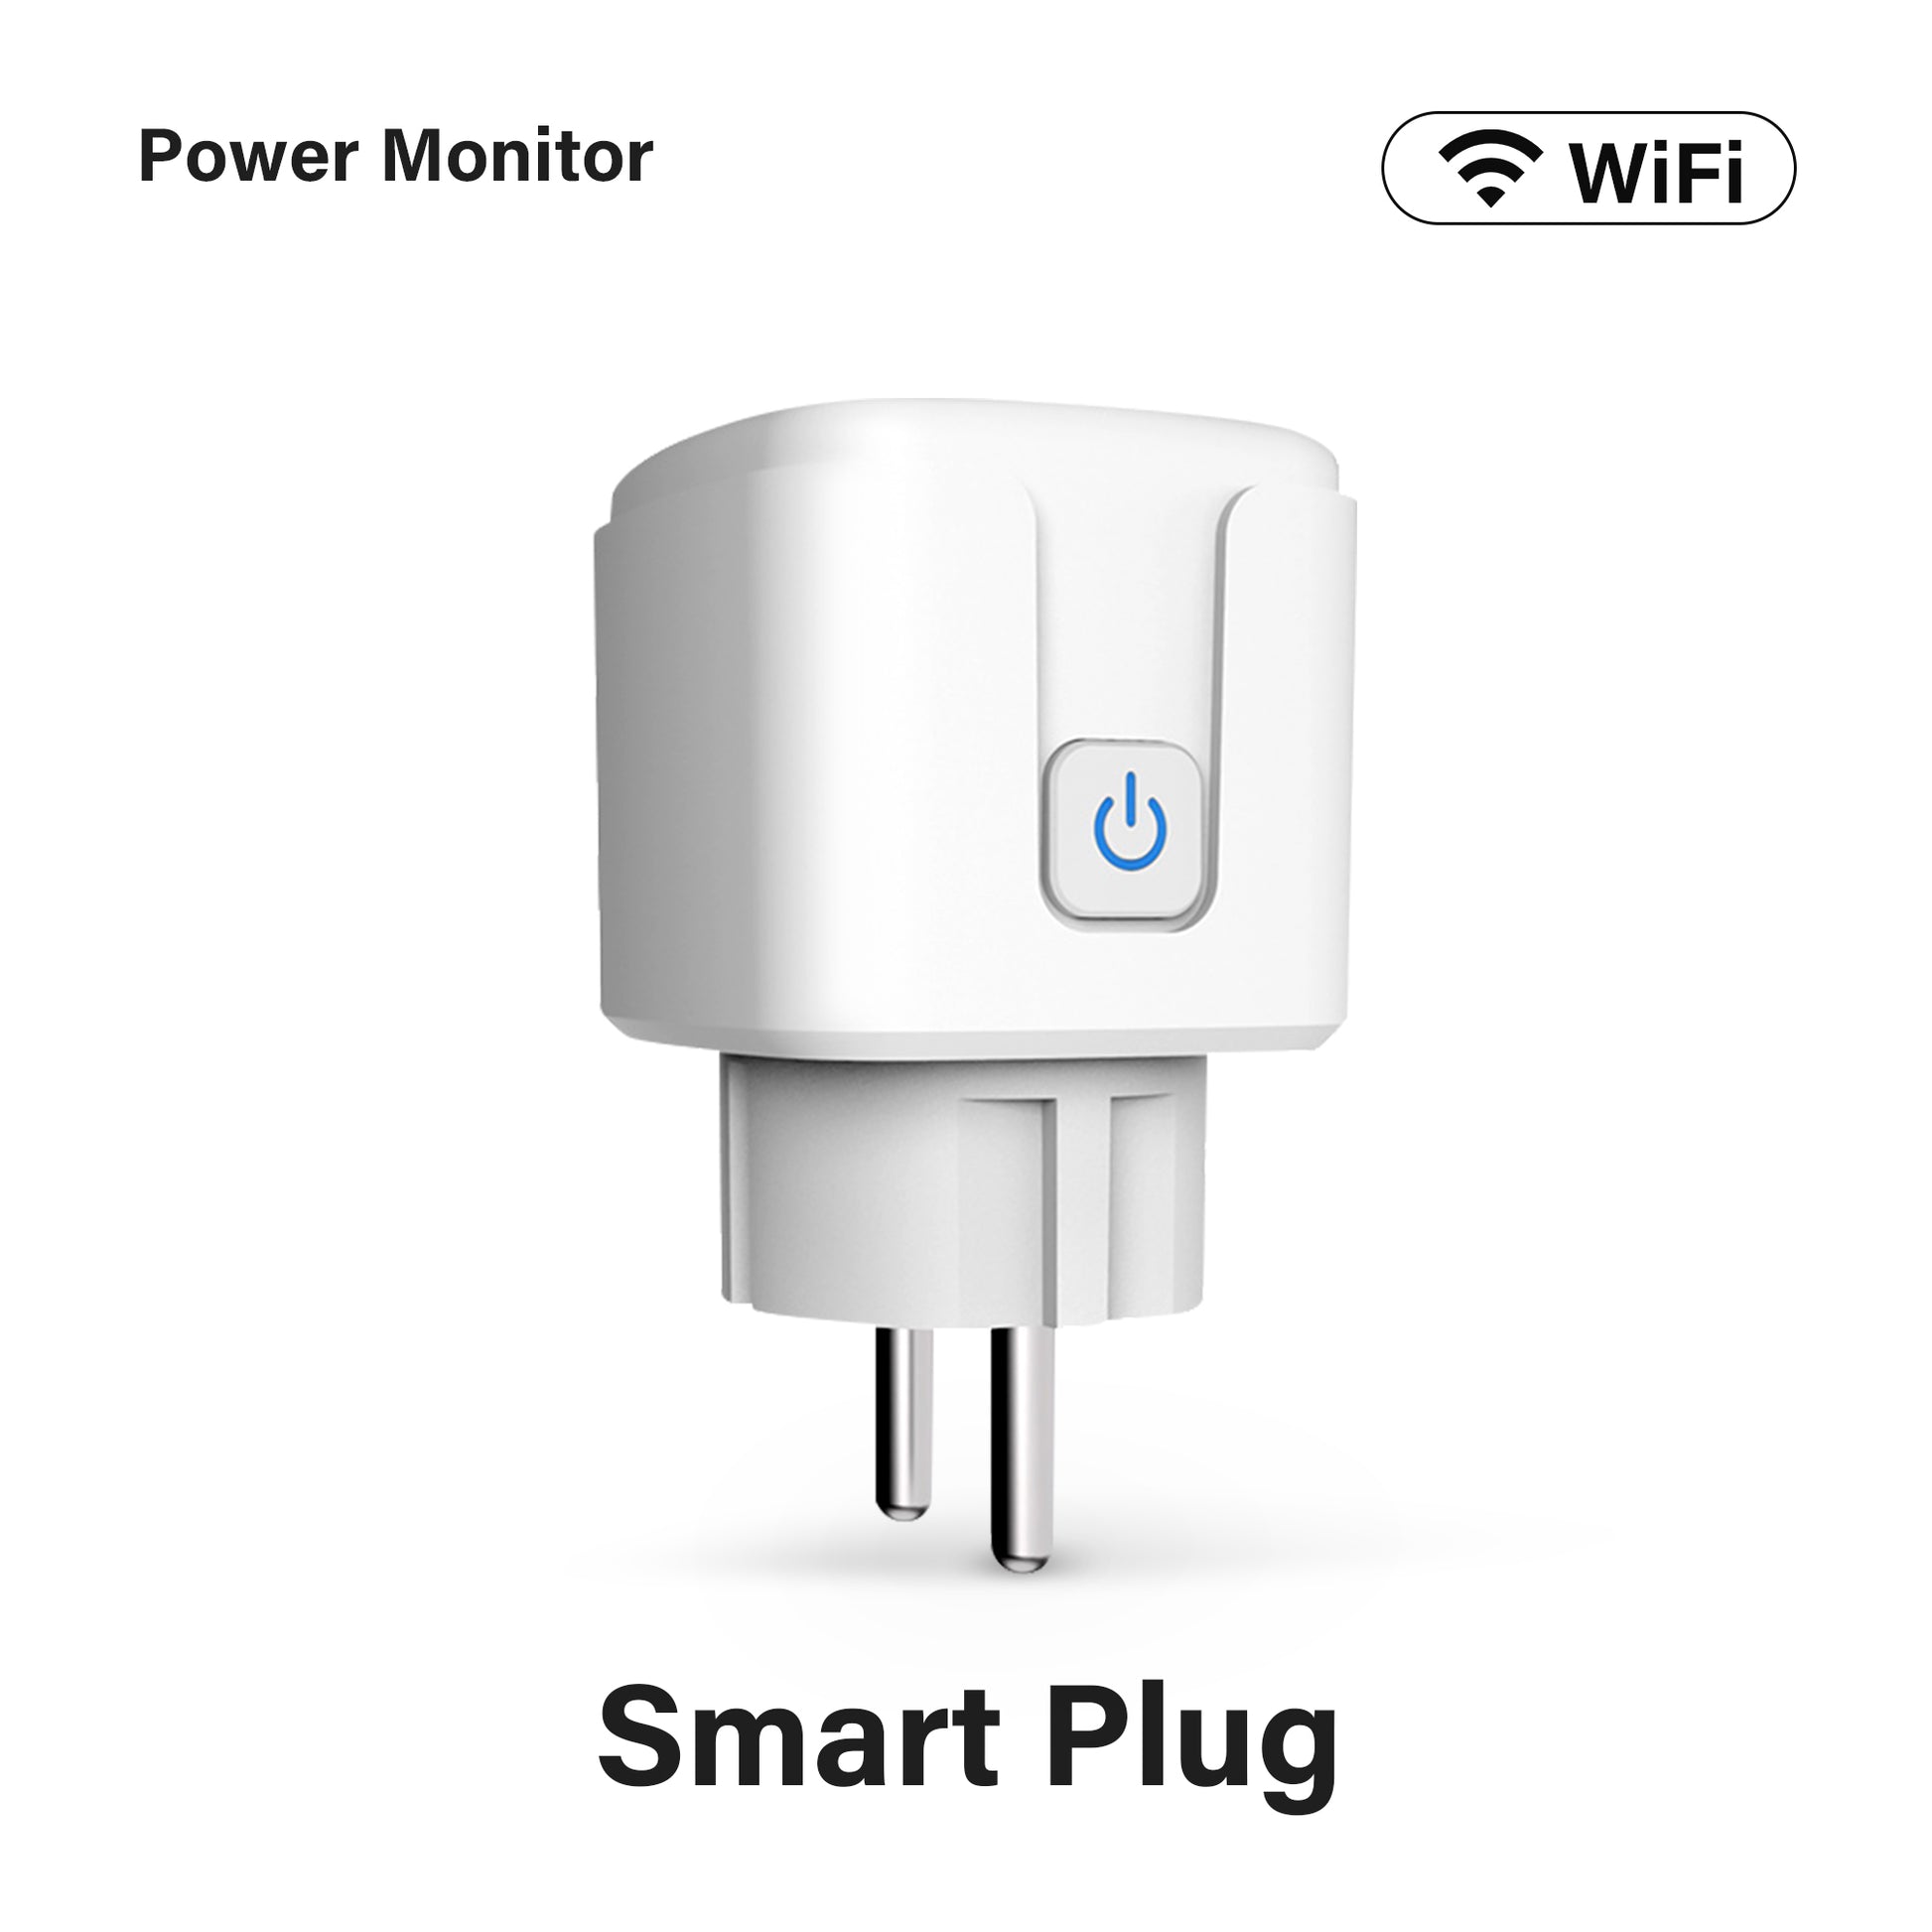 MiBoxer SWE01 16A WiFi Smart Outlet Plugs